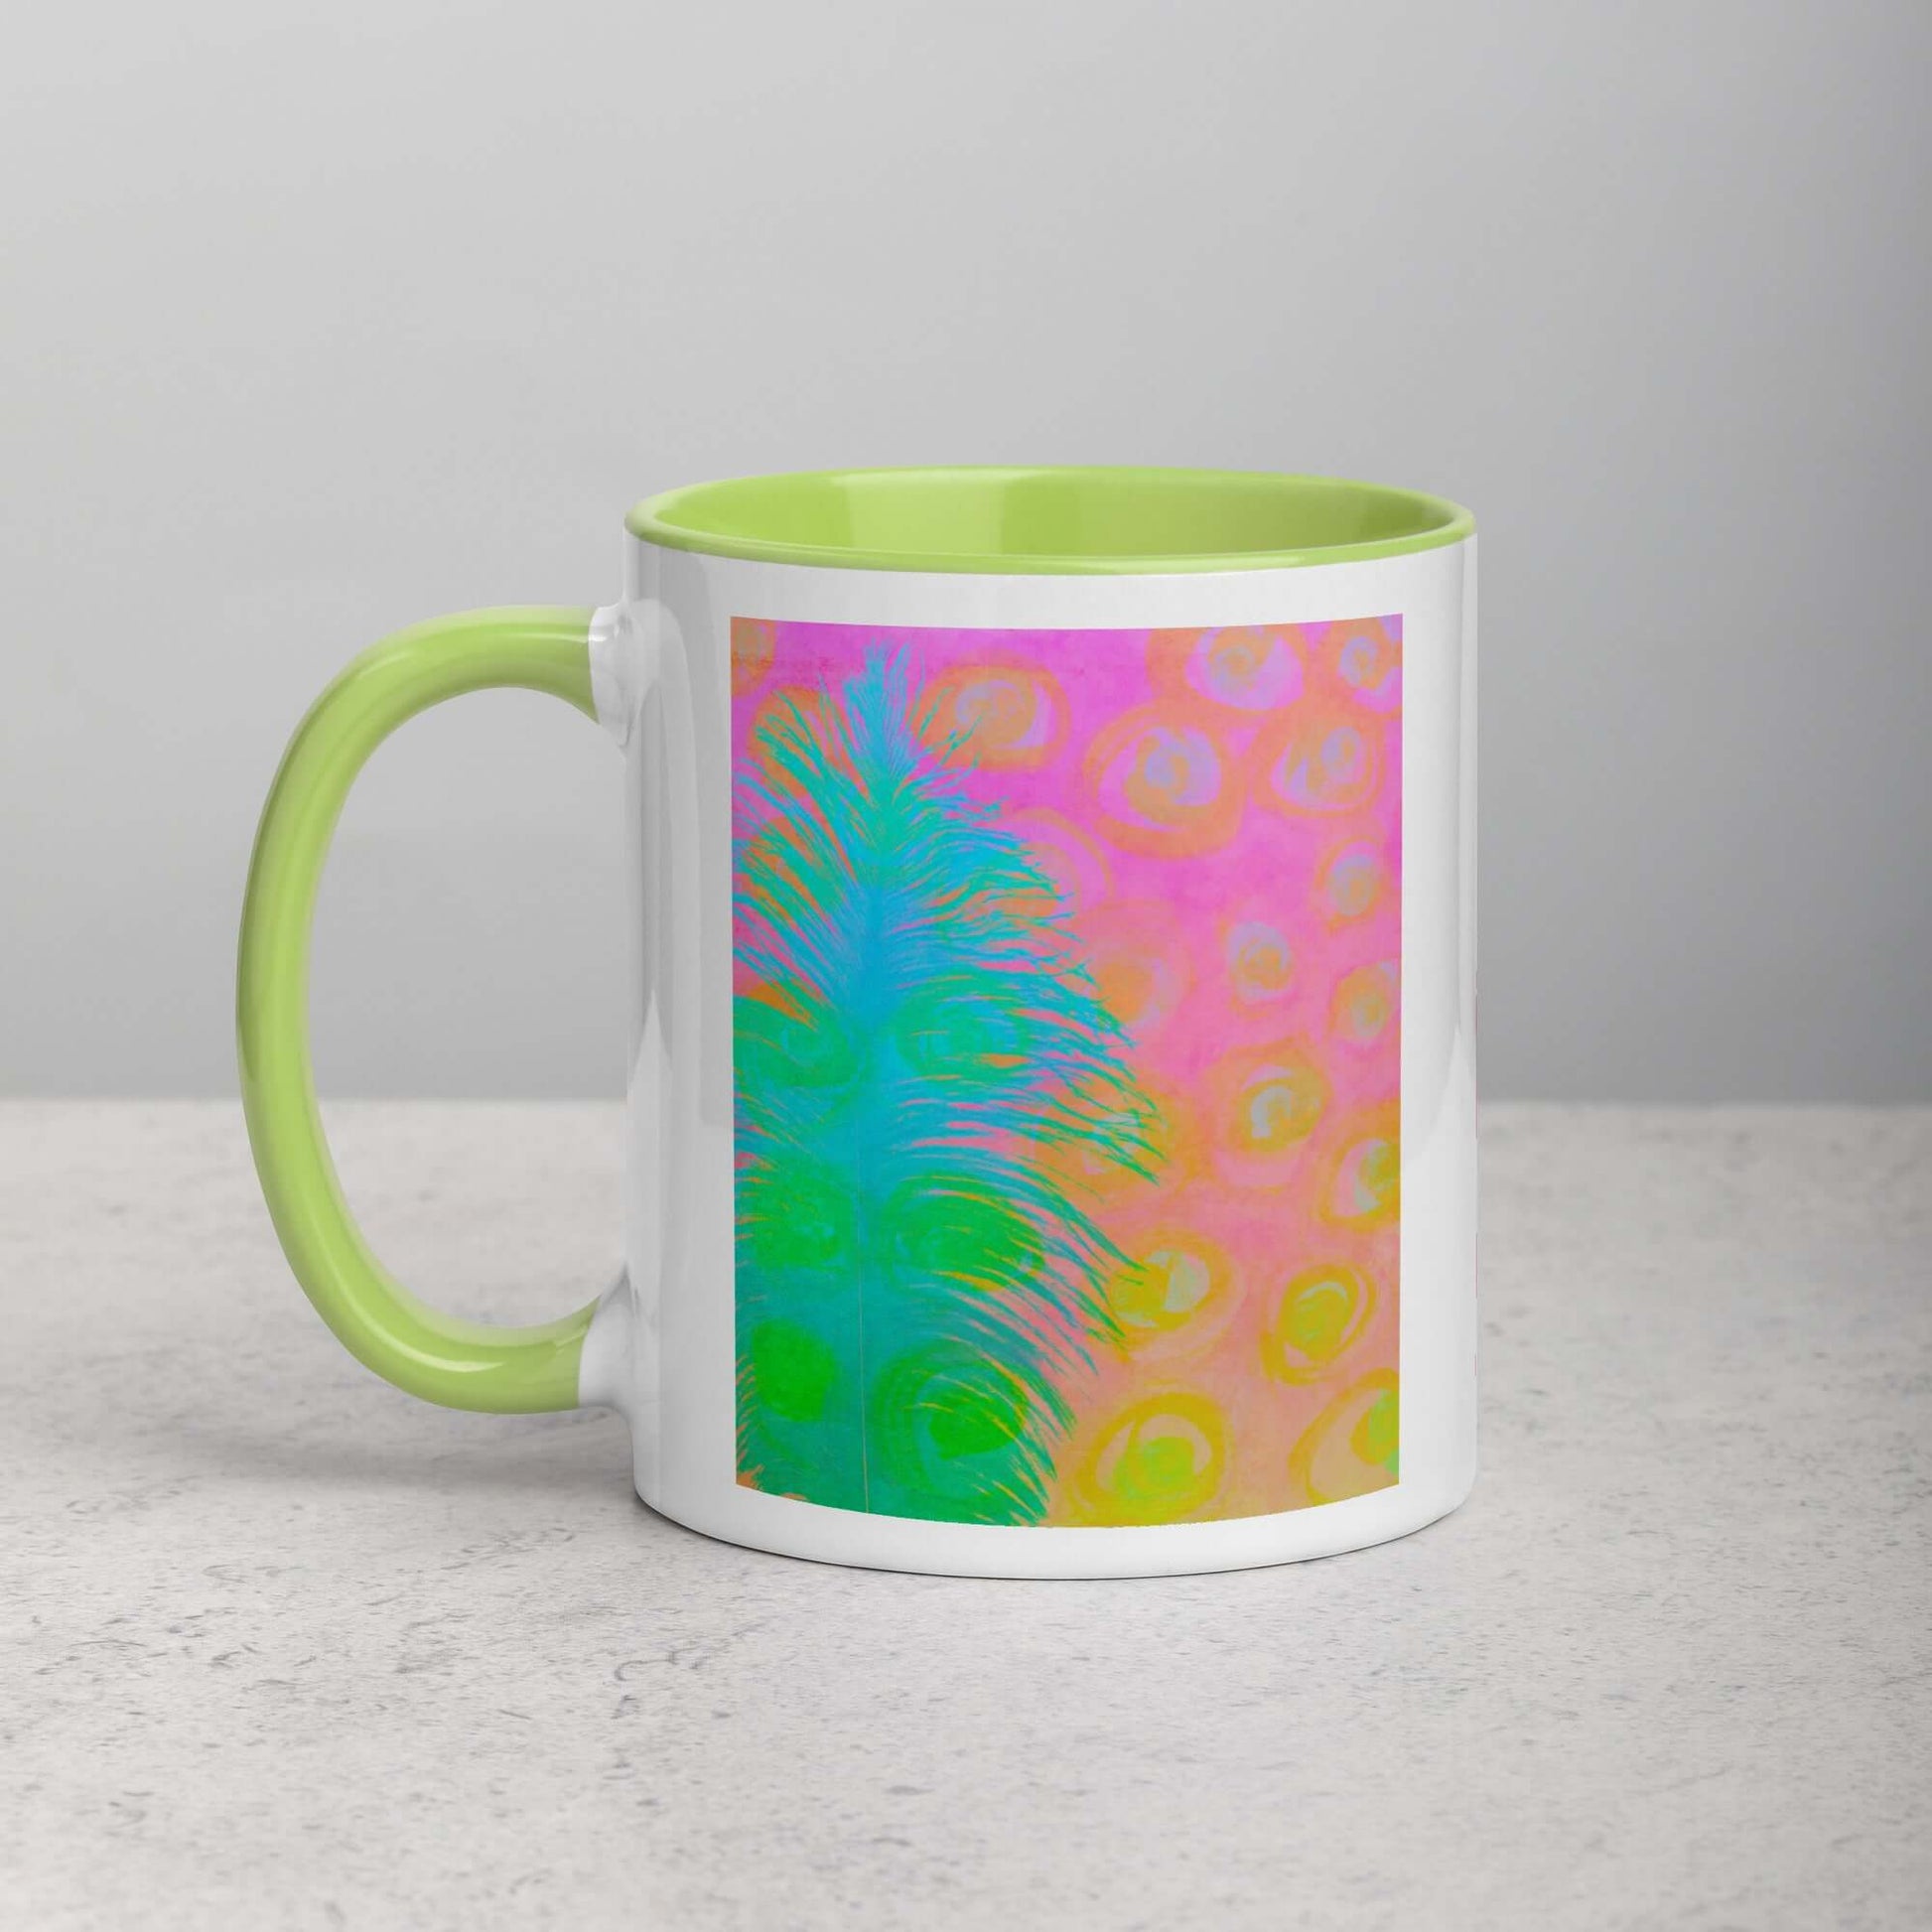 Bright Blue-Green Ostrich Feather on Pink and Yellow Background “My Other Half” Abstract Art Mug with Lime Green Color Inside Left Handed Front View